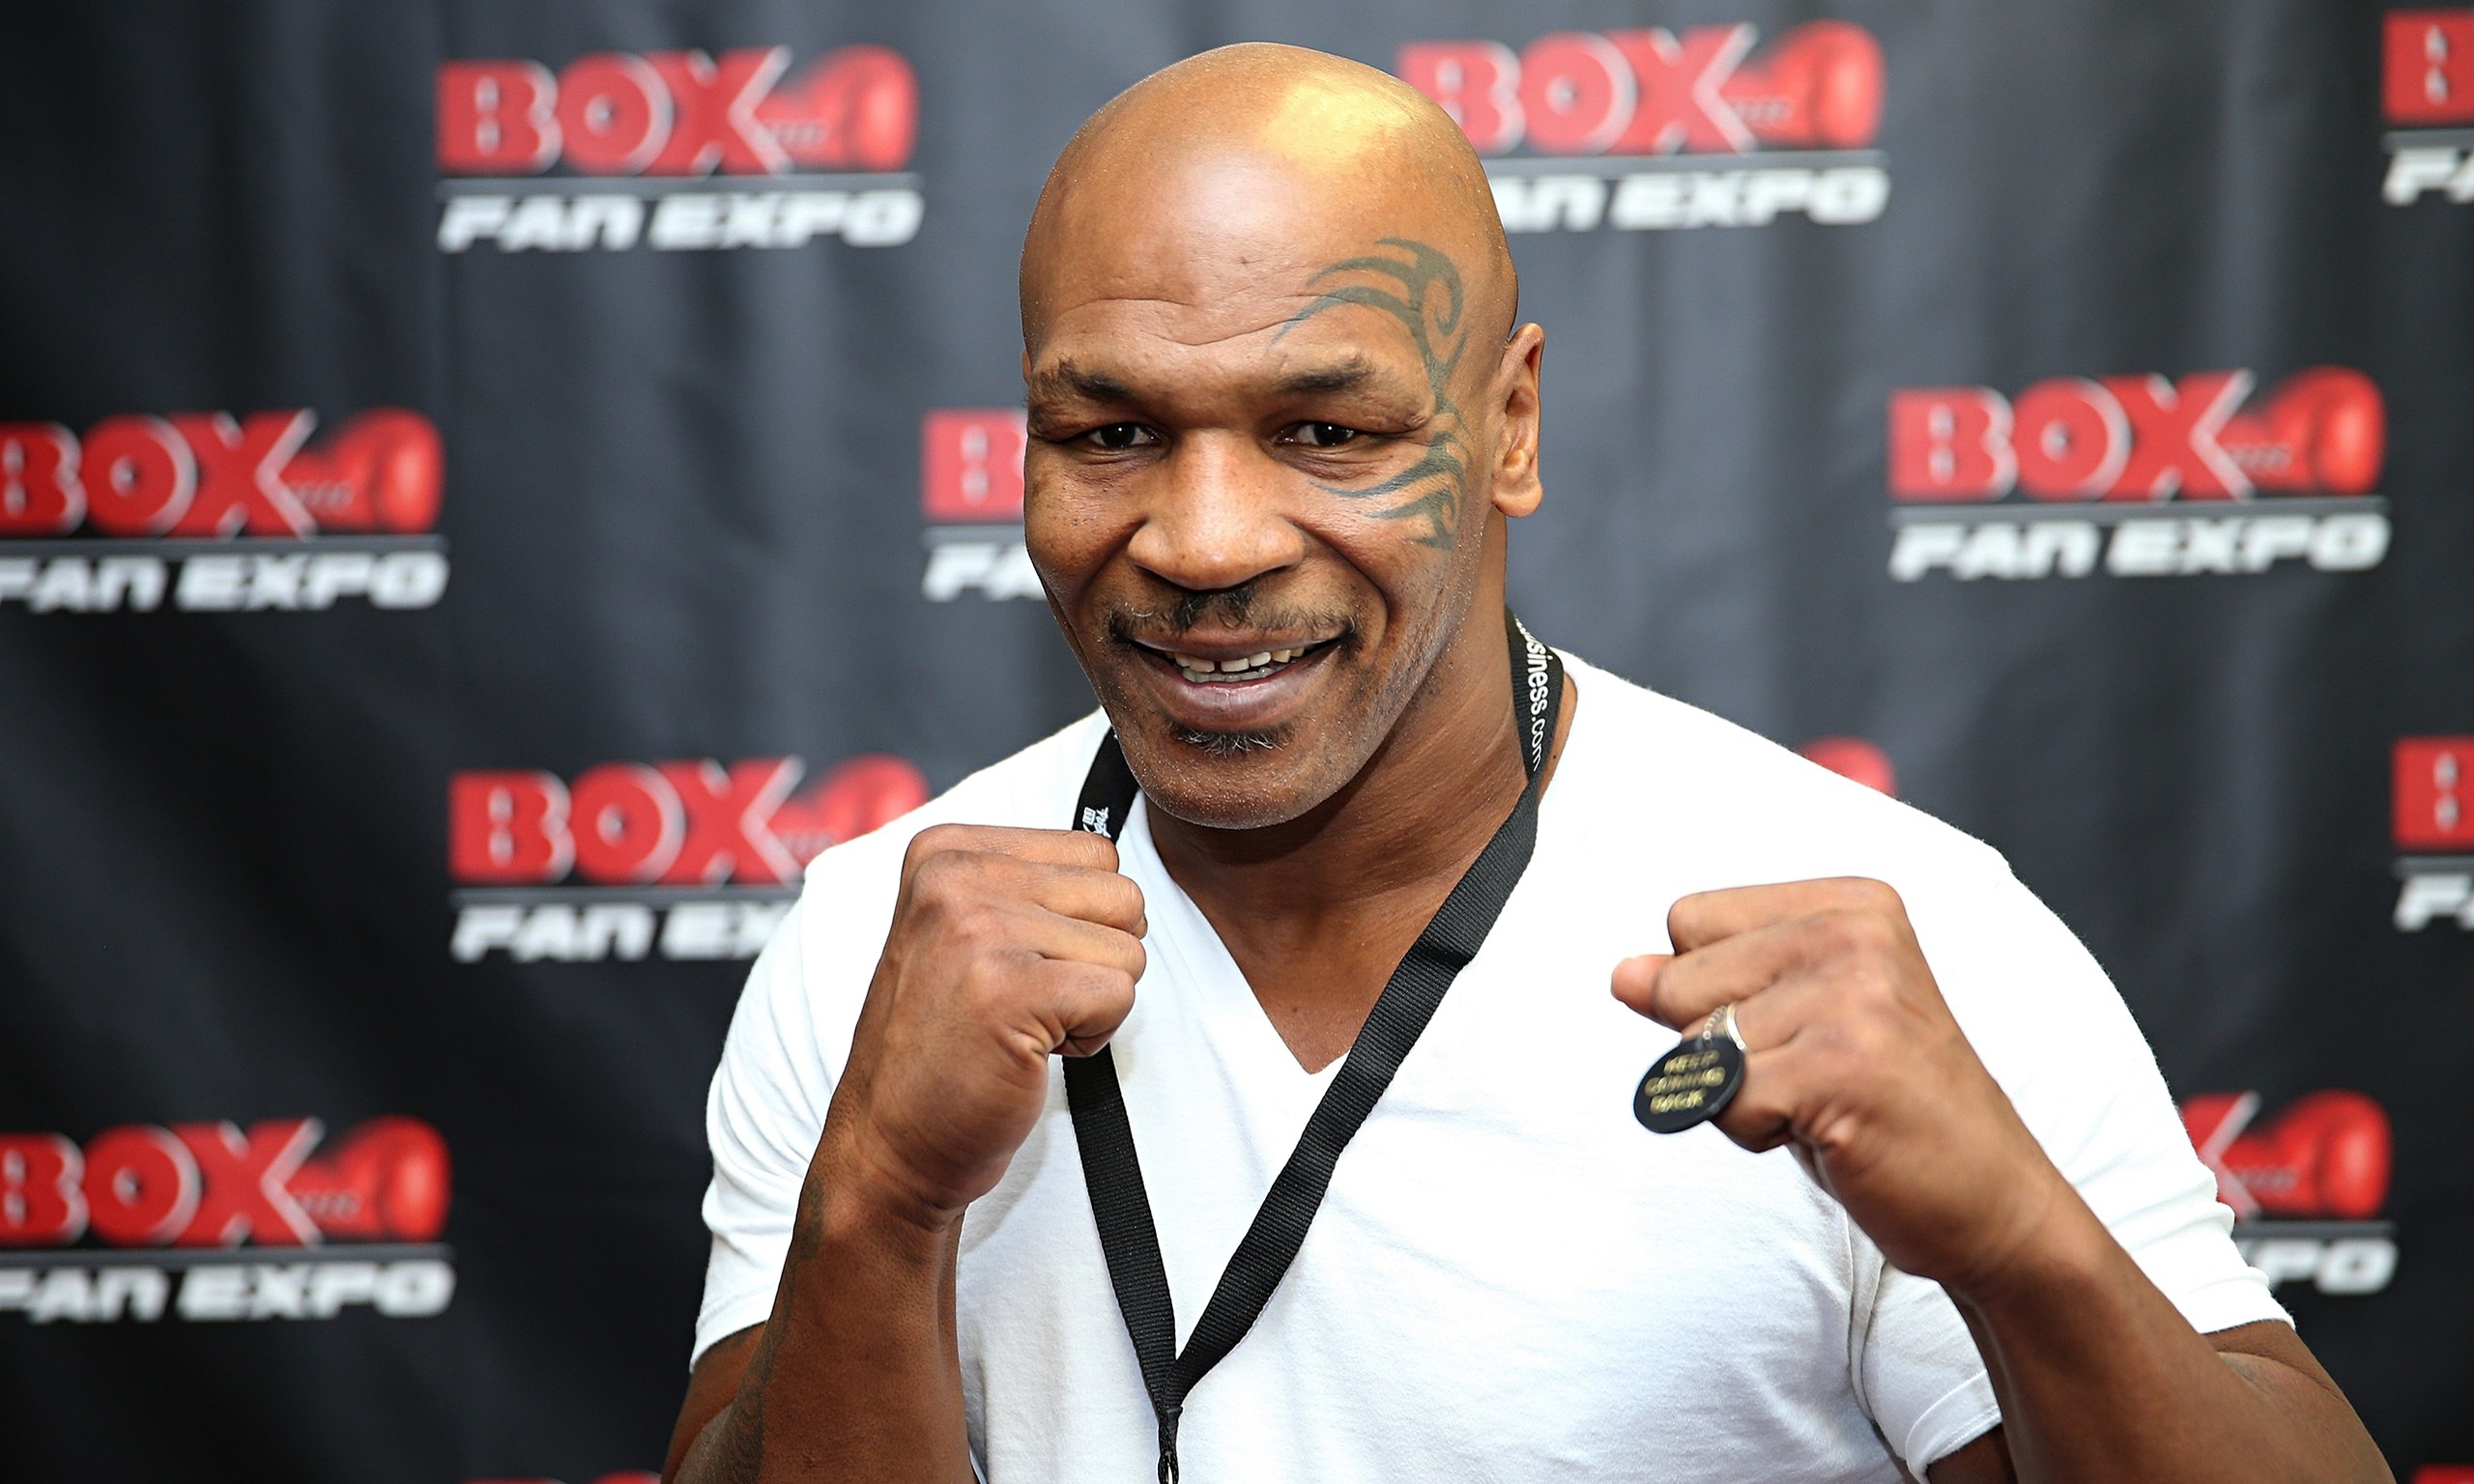 Mike Tyson Wallpapers  Top 17 Best Mike Tyson Wallpapers Download